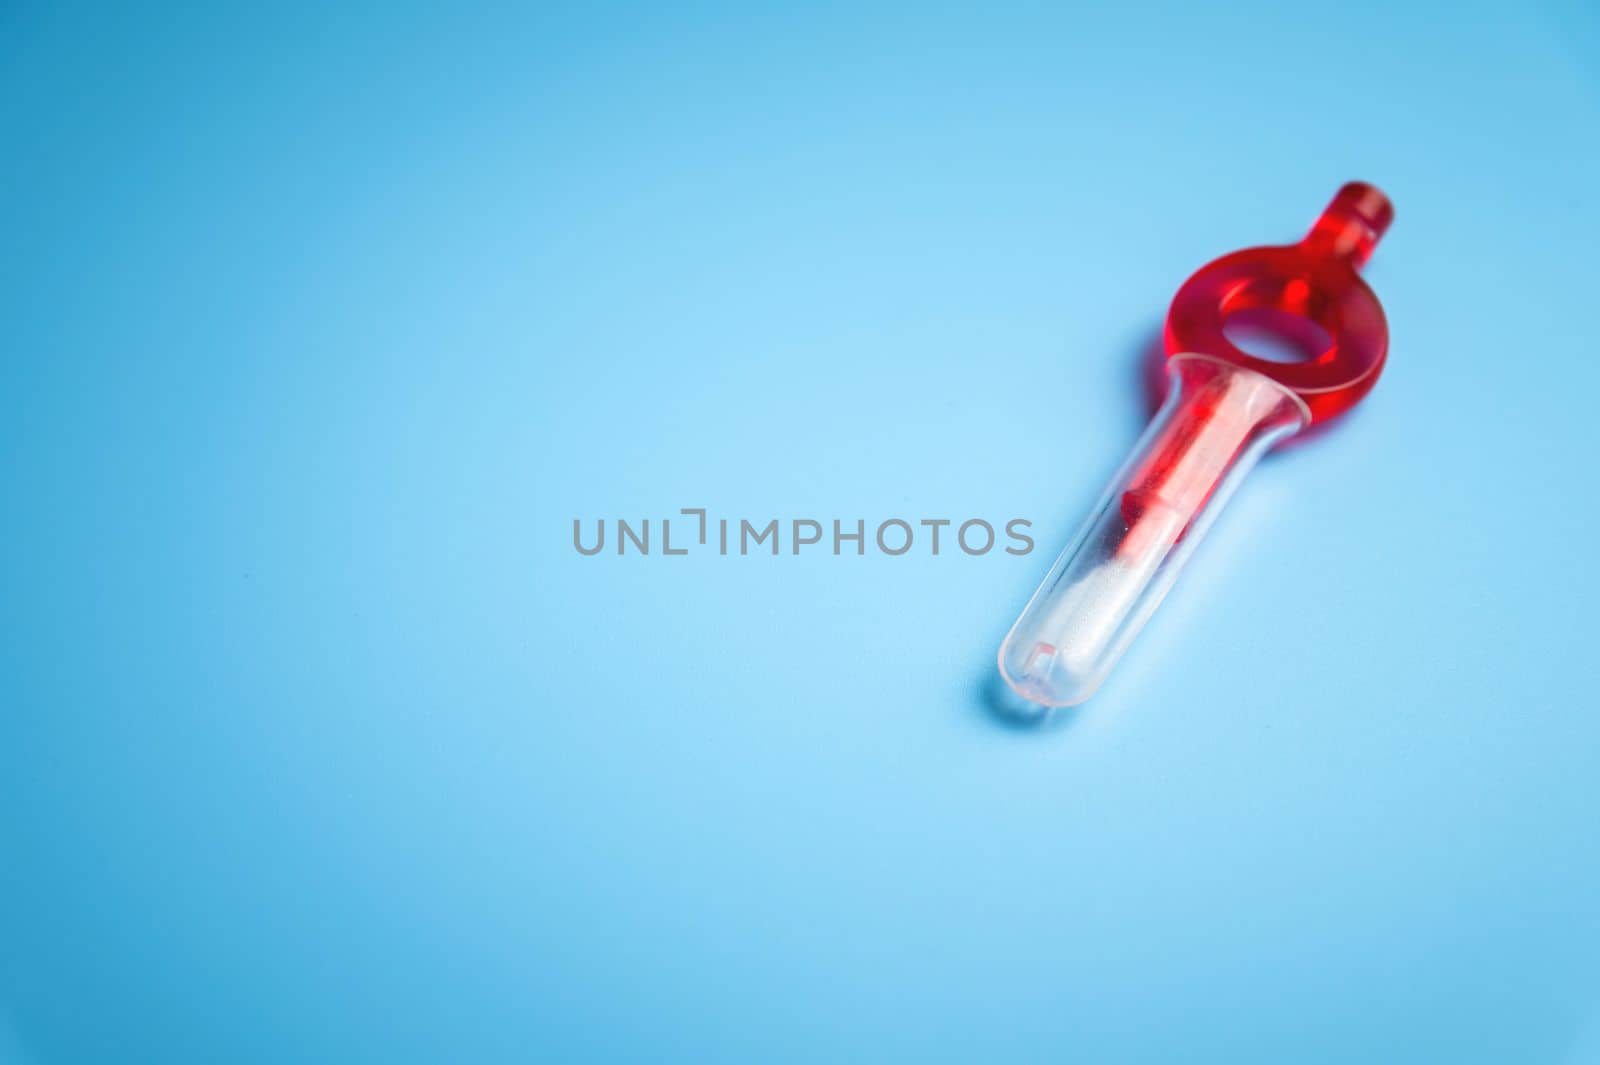 red interdental orthodontic new toothbrush on blue background, banner mockup by yanik88